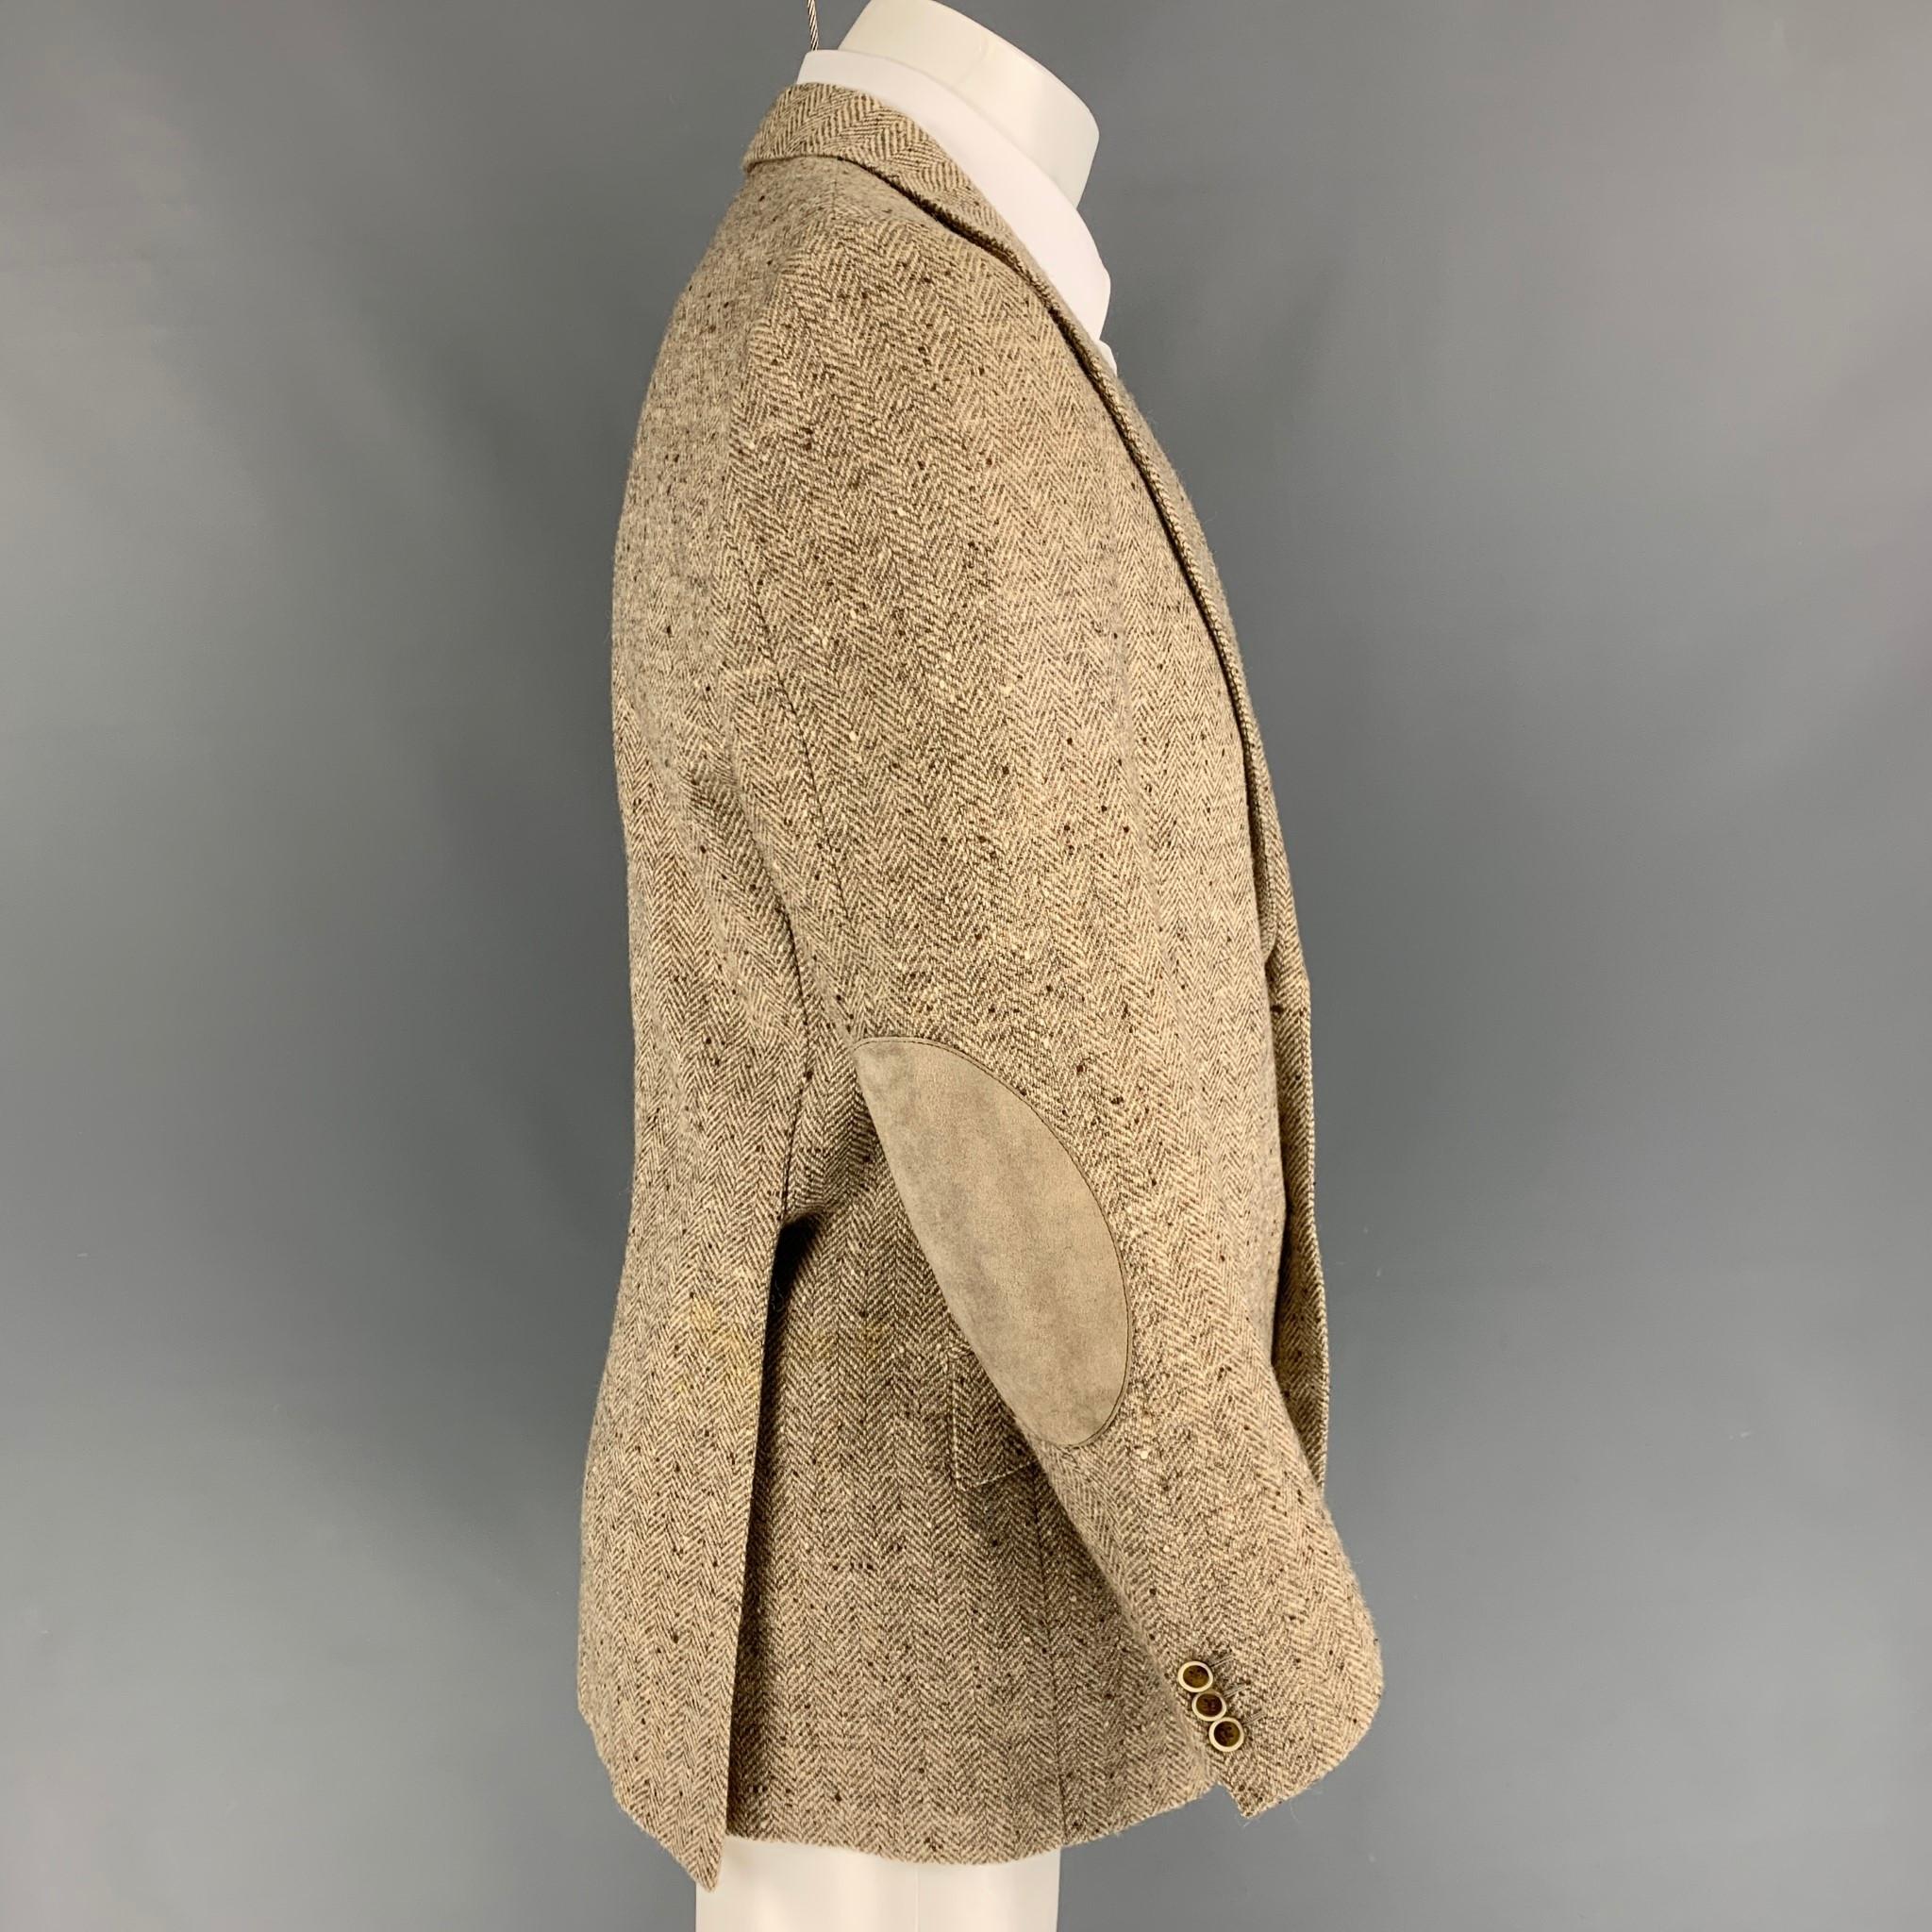 BRIONI for WILKES BASHFORD sport coat comes in a cream & taupe herringbone wool / alpaca with a full liner featuring a notch lapel, flap pockets, suede elbow patches, double back vent, and a double button closure. Made in Italy. 

Good Pre-Owned